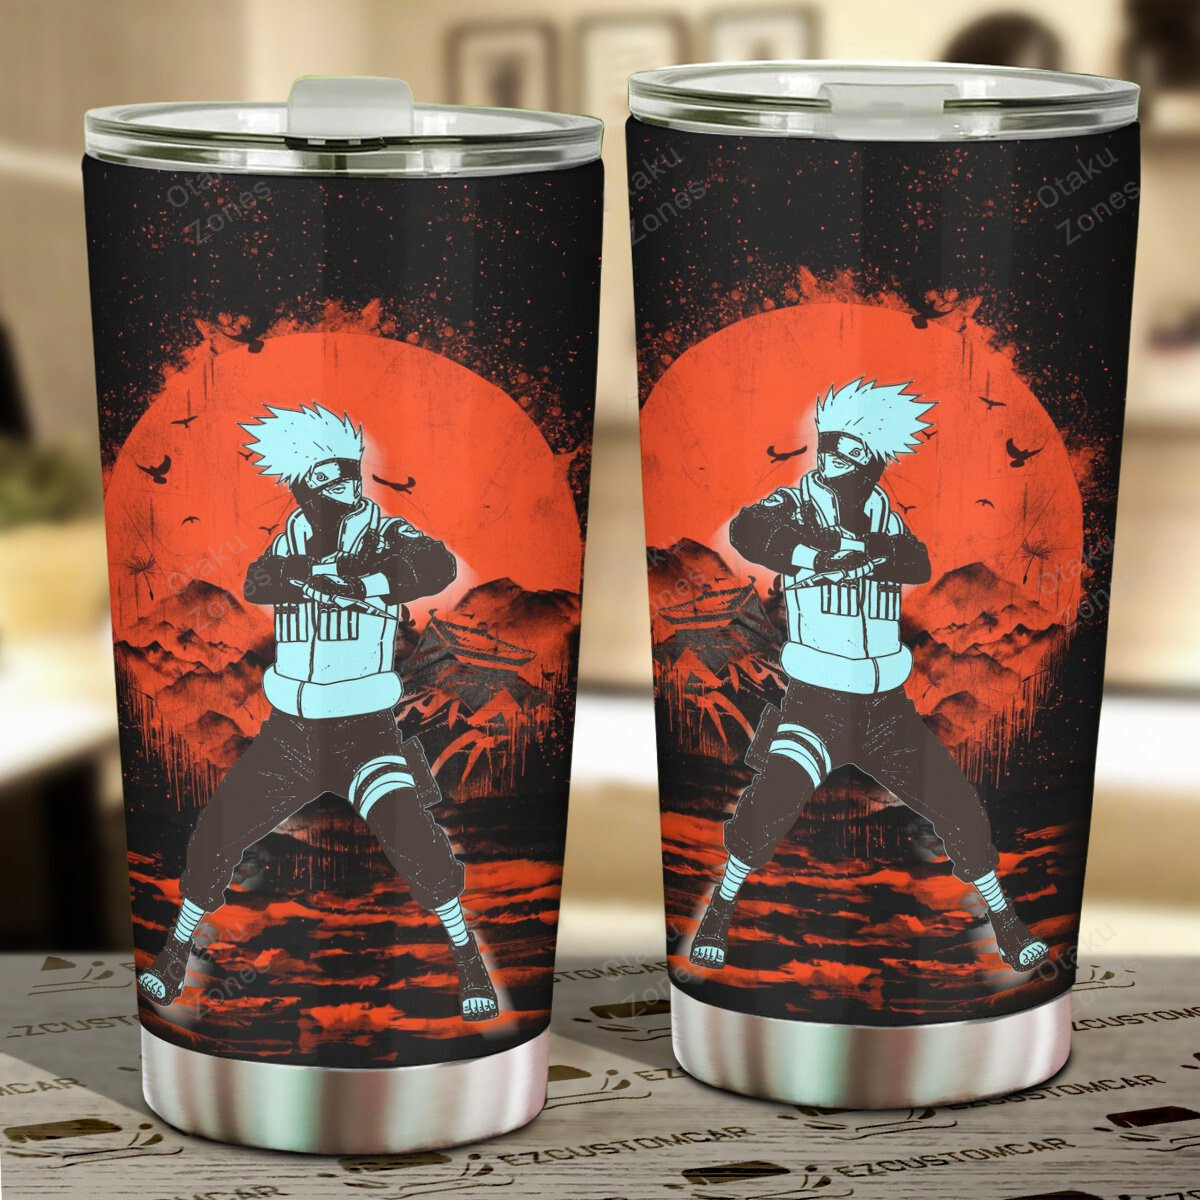 Go ahead and order your new tumbler now! 29